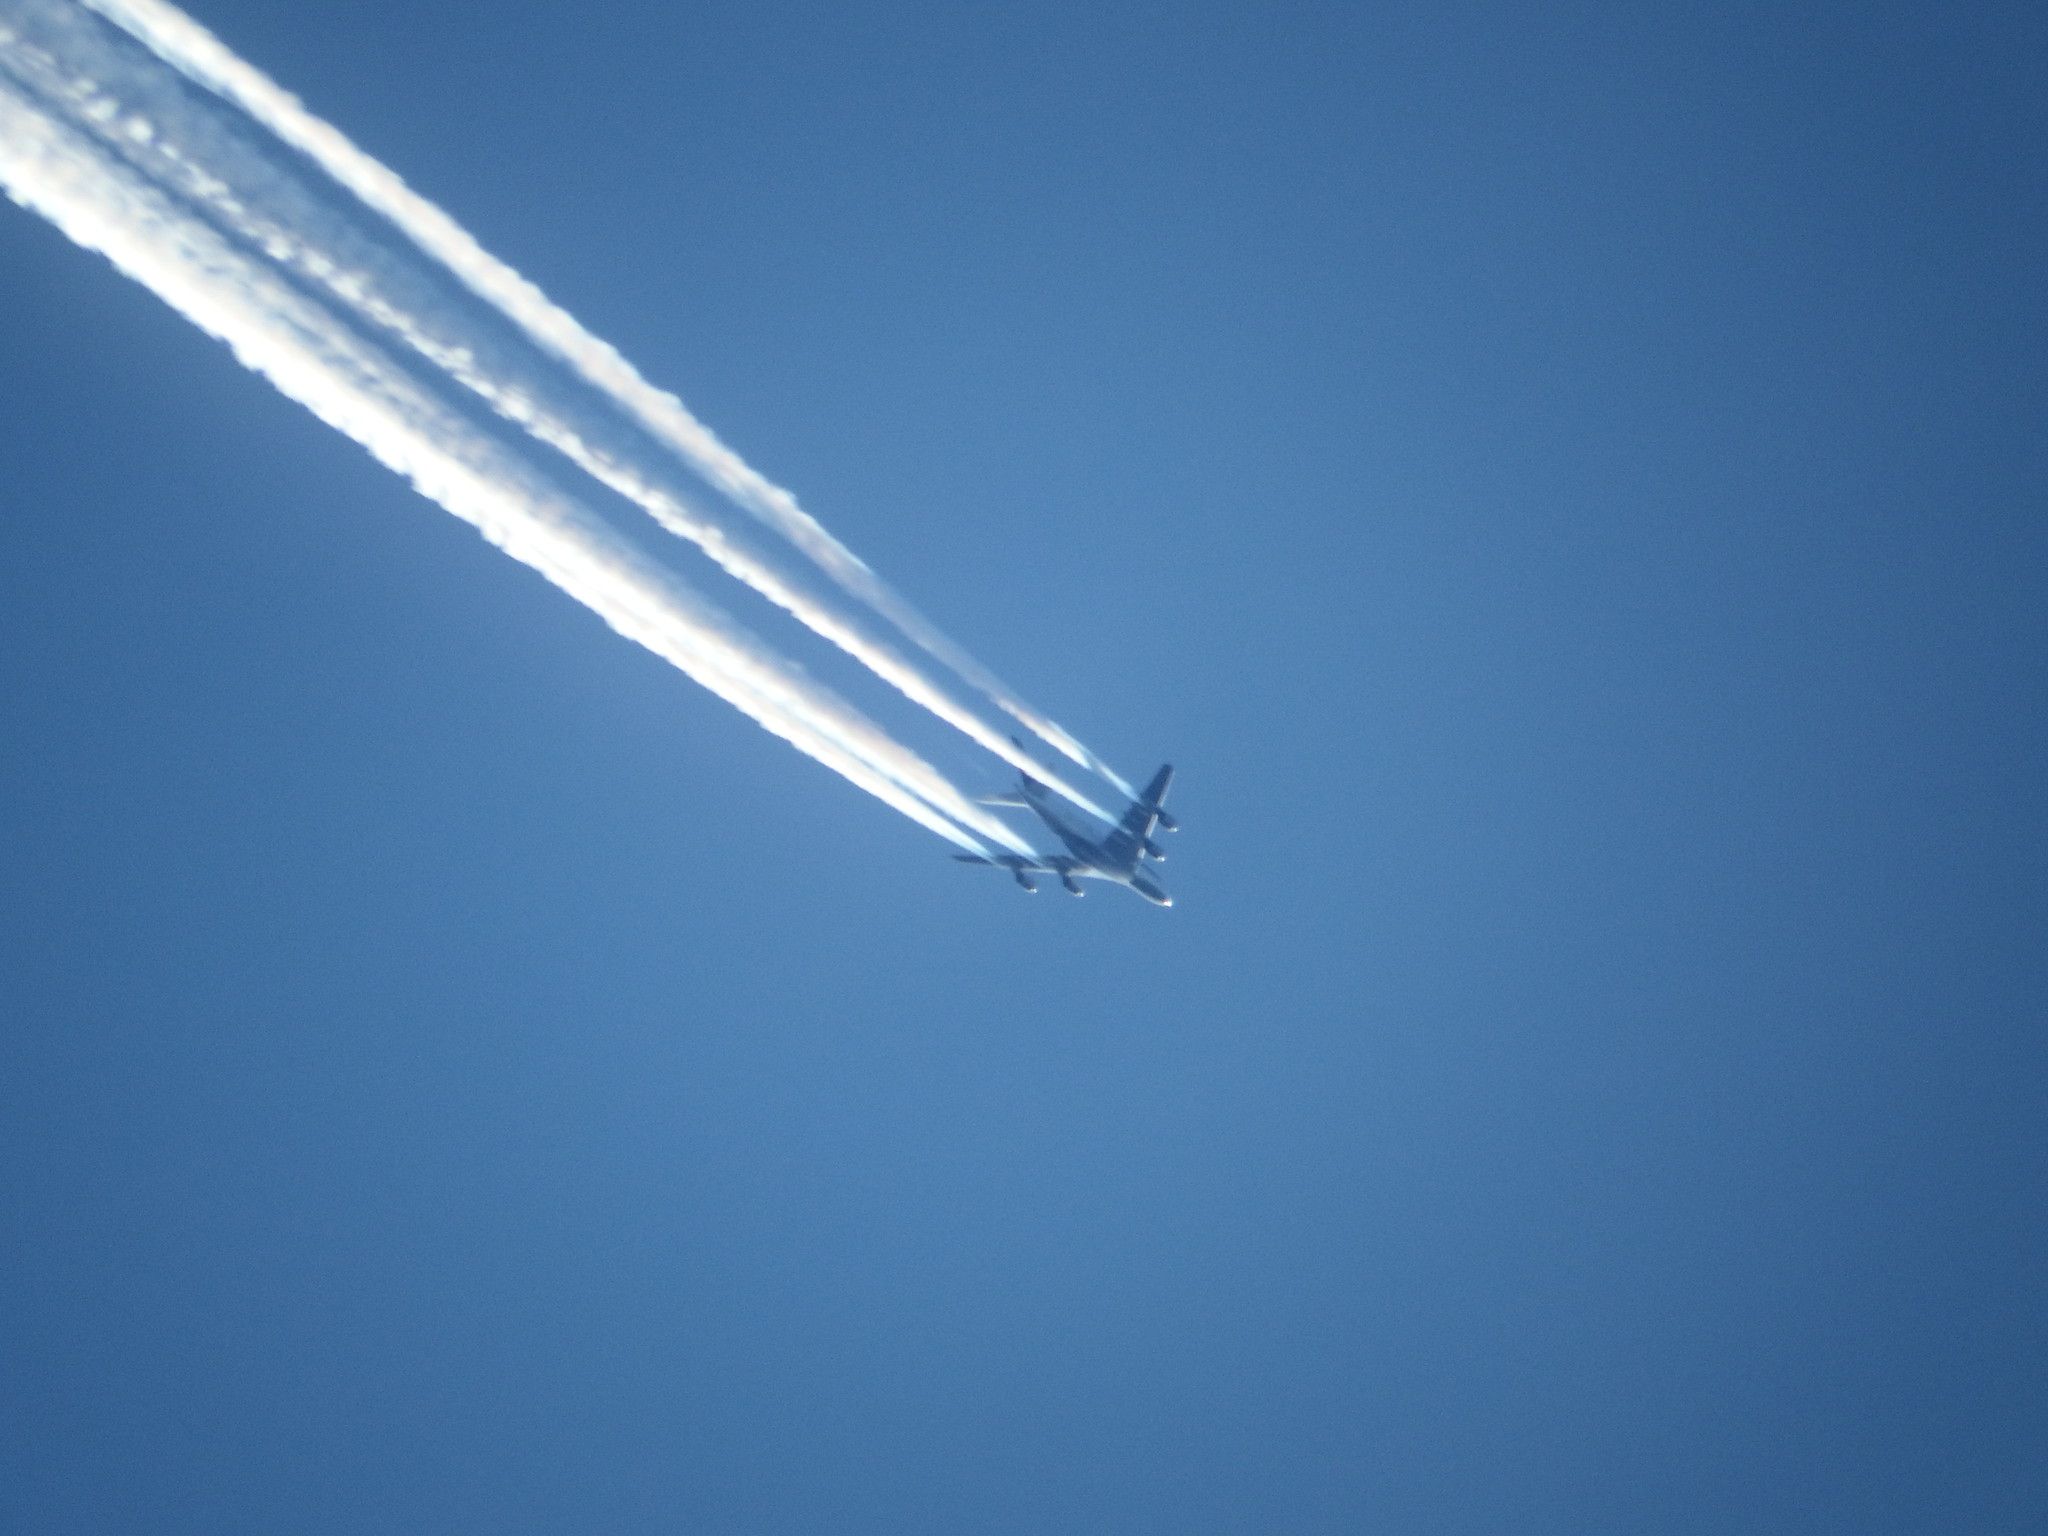 Planes and contrails - A380 making contrails in the blue yonder